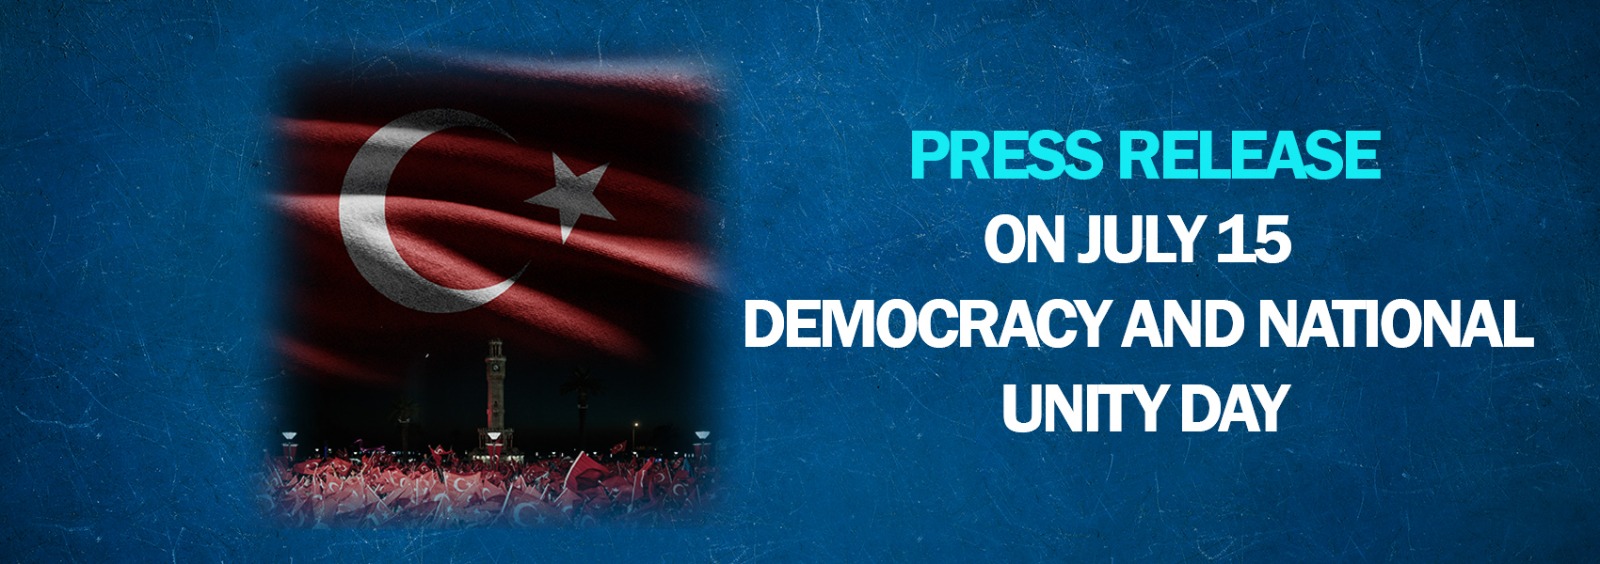 Press Release on July 15 Democracy and National Unity Day